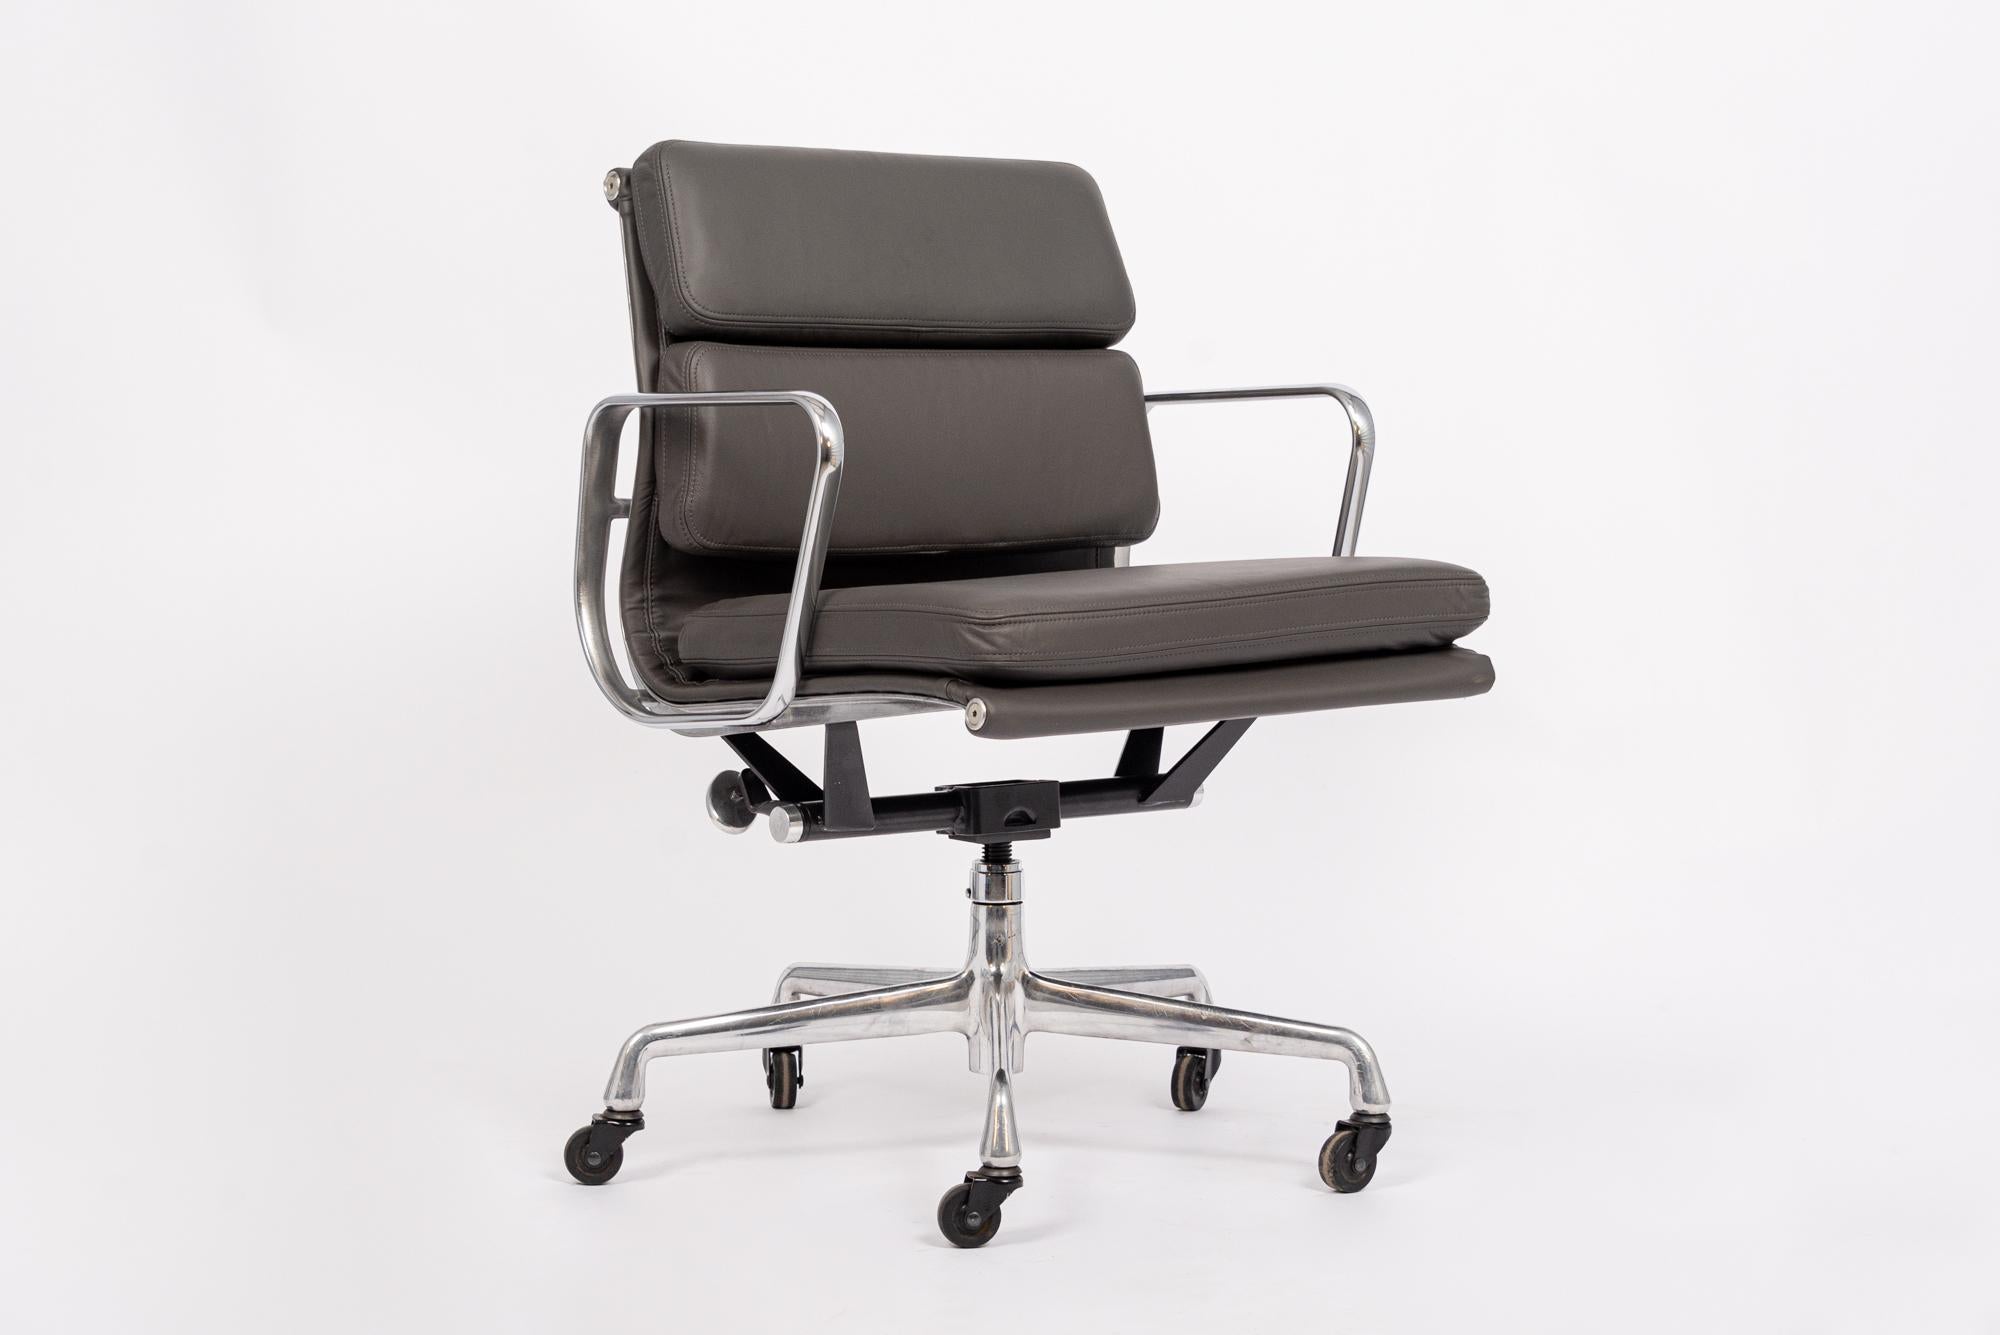 This authentic Eames for Herman Miller Soft Pad Management Height dark gray leather office chair from the Aluminum Group Collection was manufactured in the 2000s. This classic mid century modern office chair was first introduced in 1969 by Charles